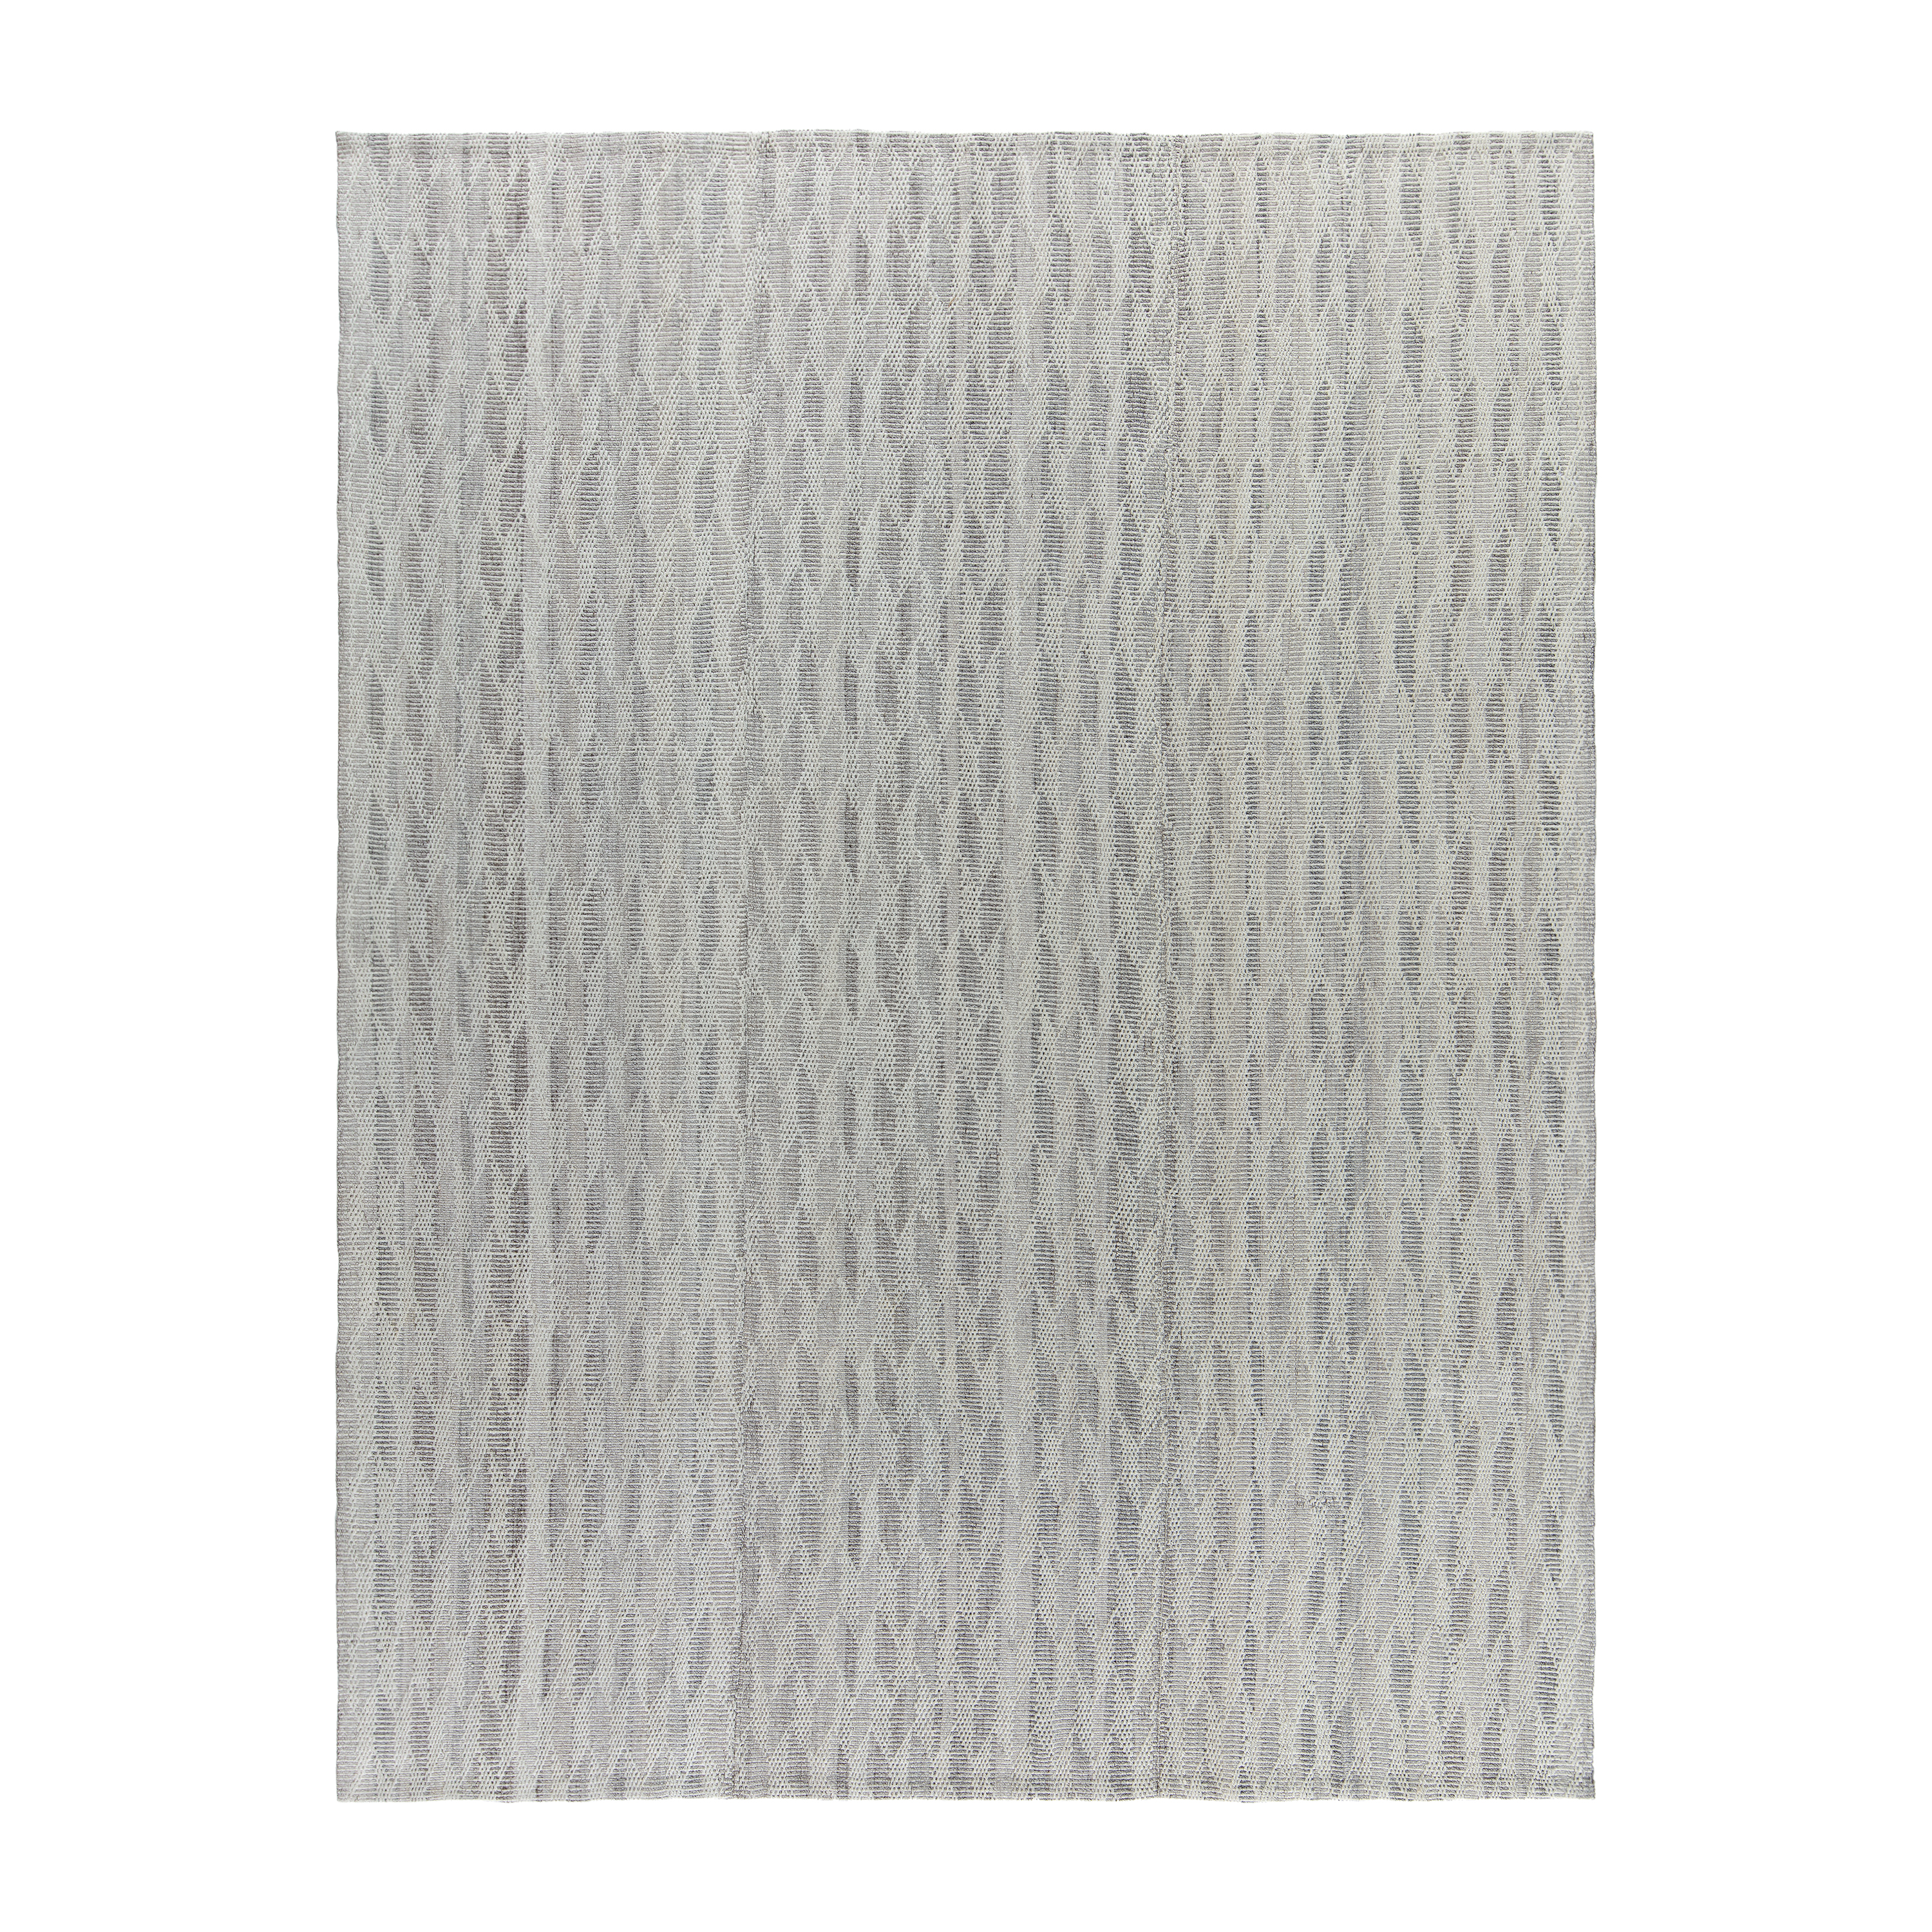 This Pelas Spearhead flatweave rug is made with handspun wool and natural dyes.